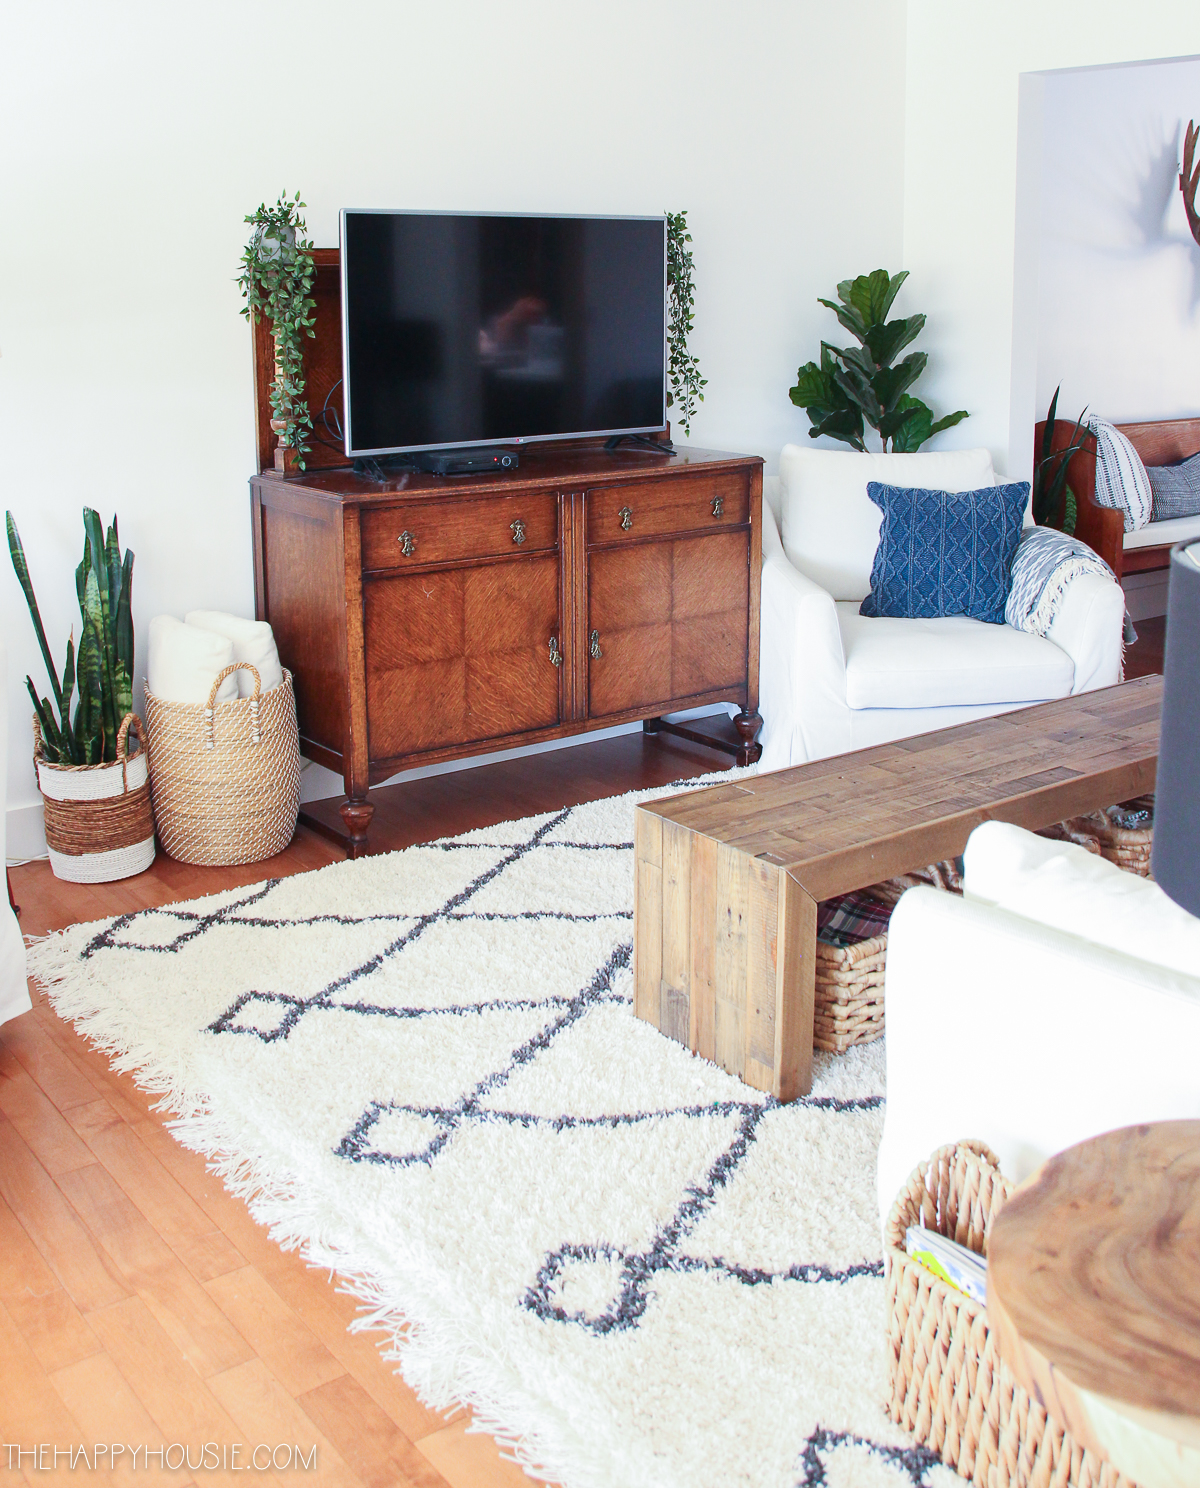 A large TV is sitting on a wooden table in the living room.